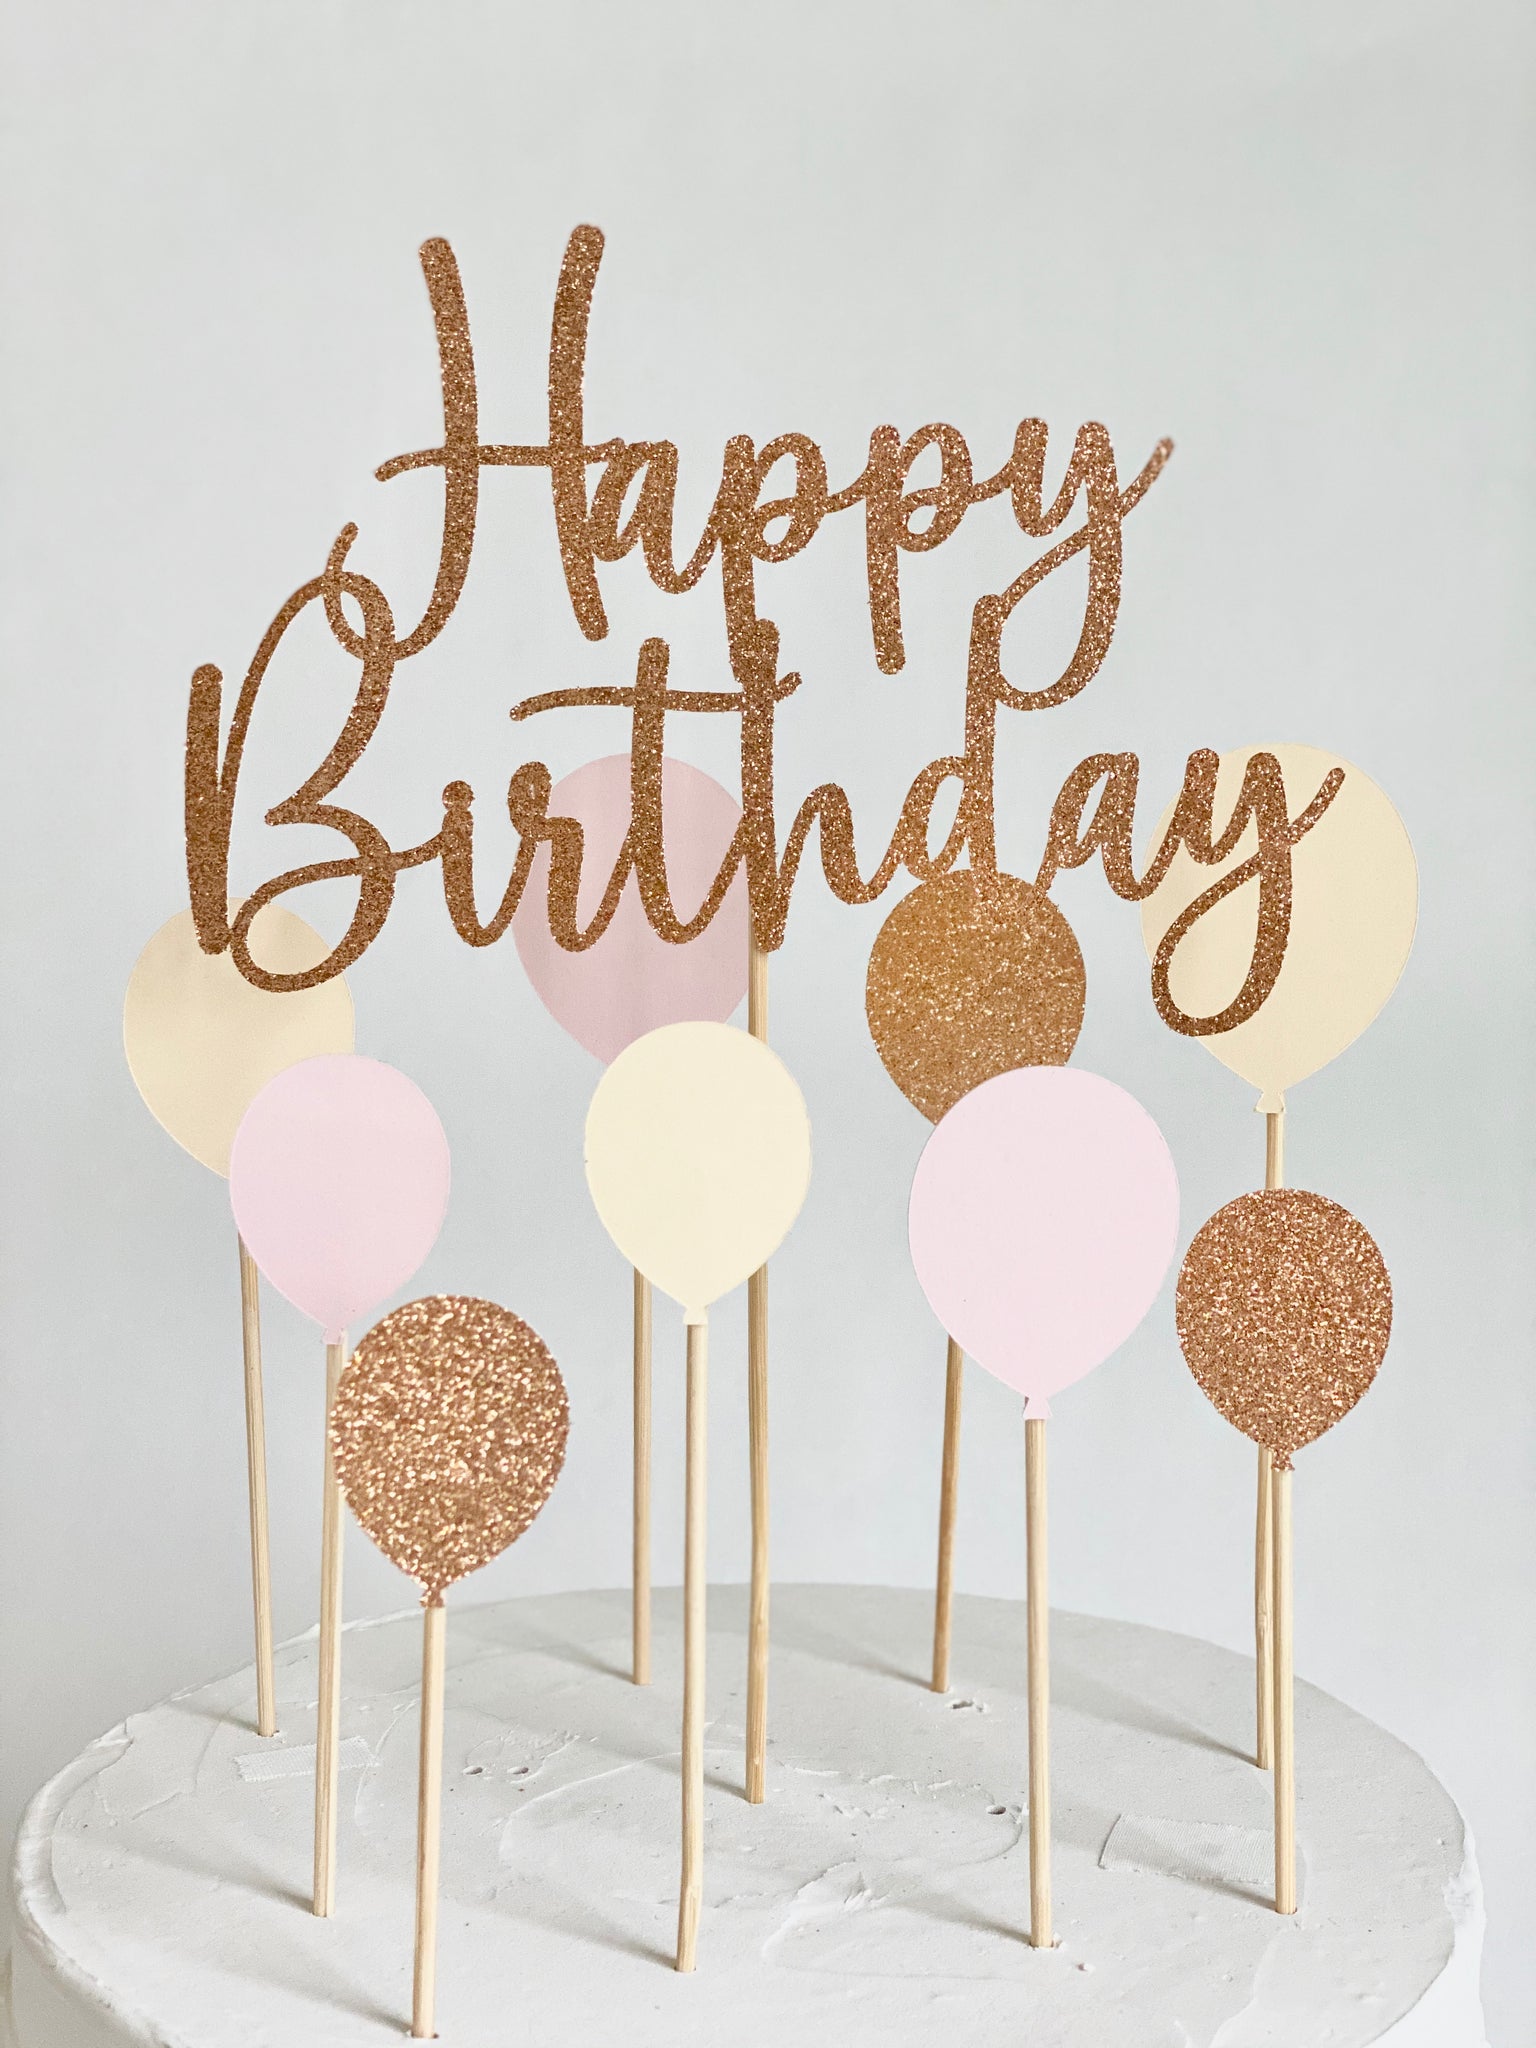 OutOfMyBubble. HAPPY BIRTHDAY BALLOON CAKE TOPPER FLOWER CONFETTI